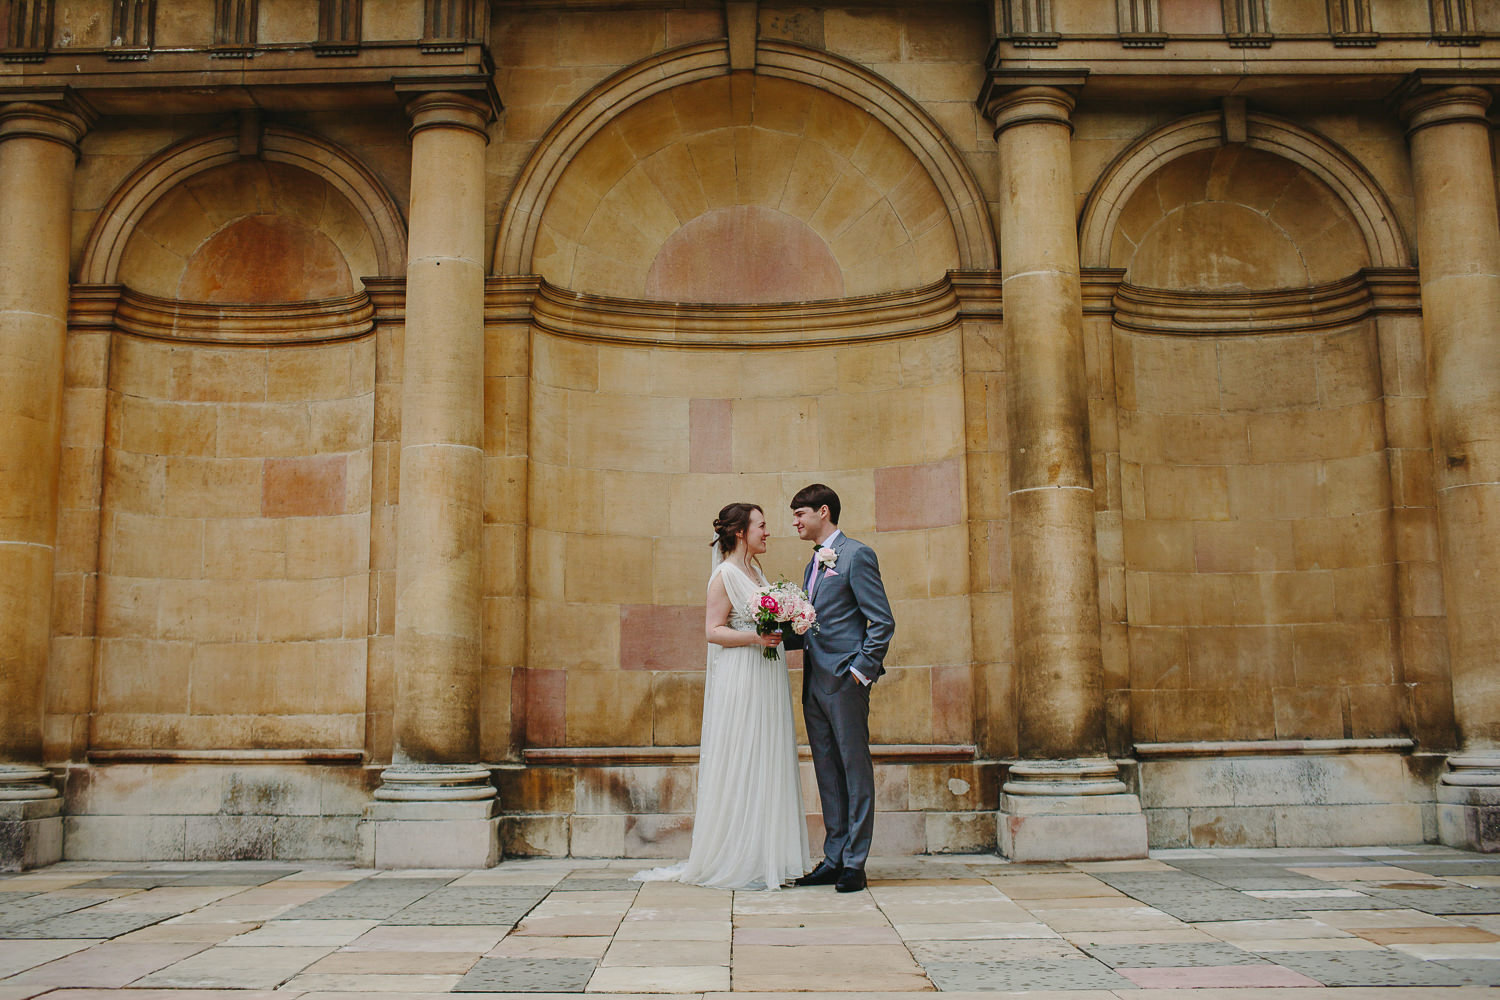 Bride and groom in front of stone architecture